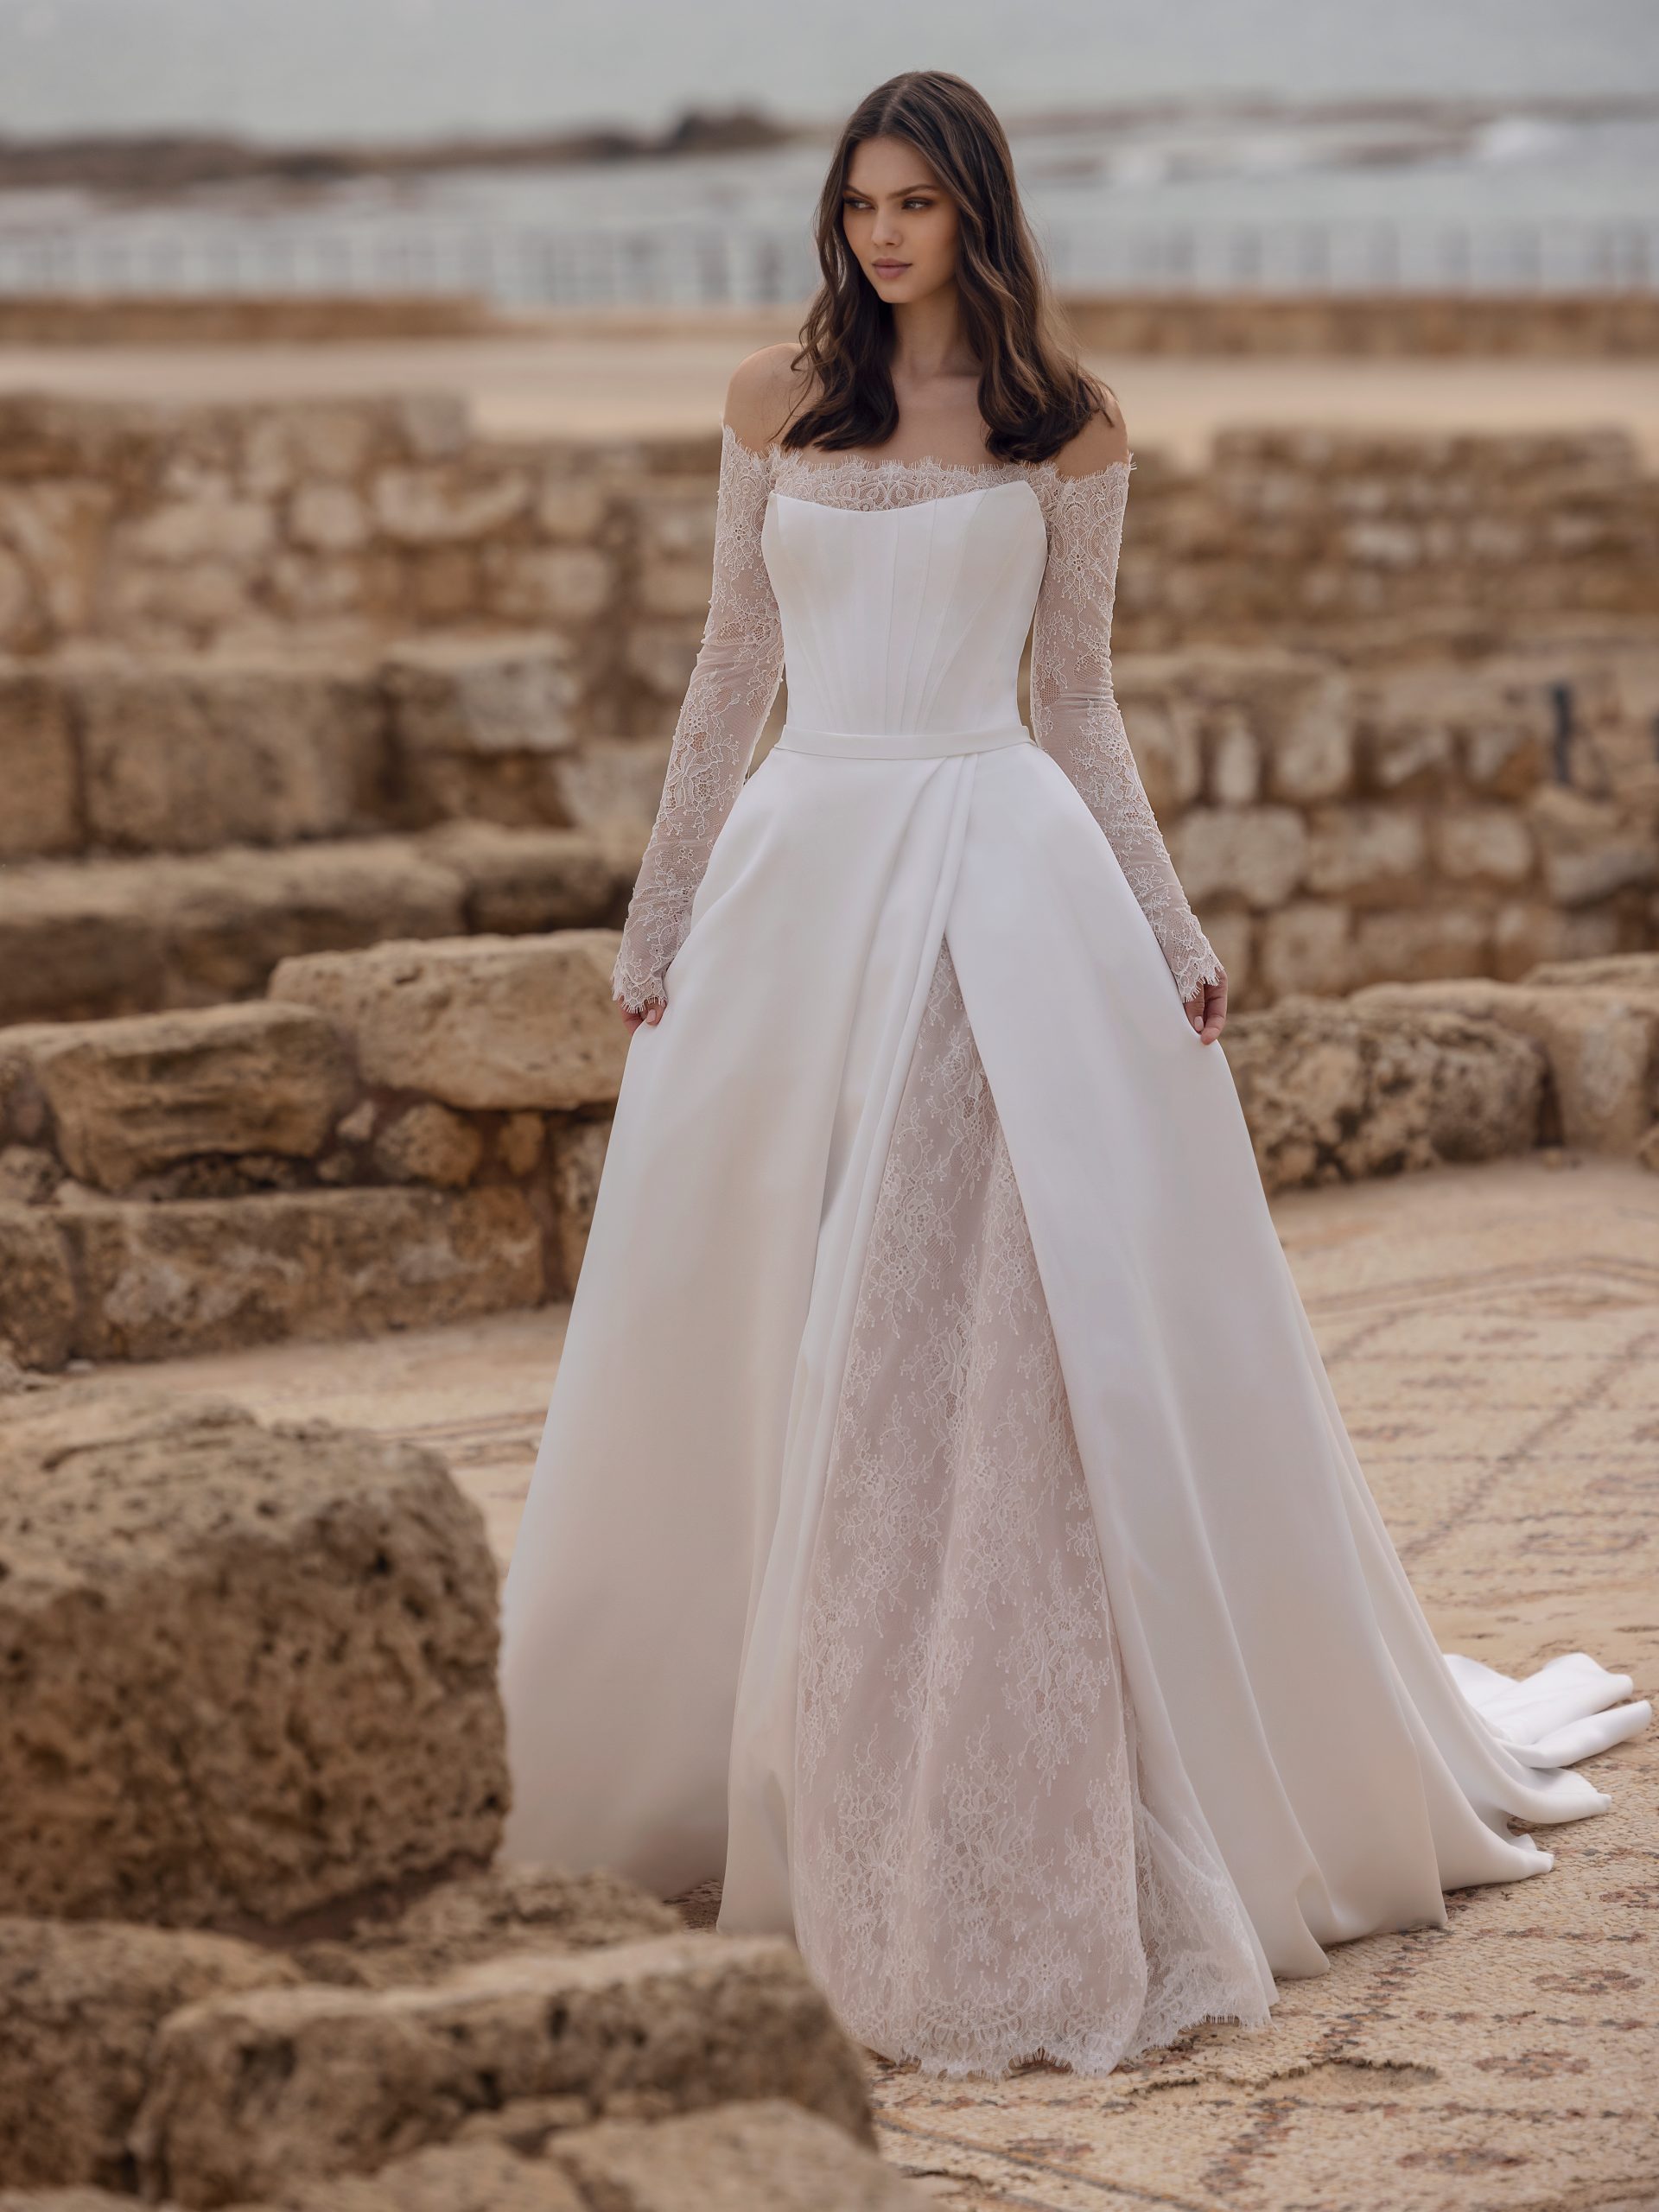 Strapless A-line Wedding Dress With Lace Underlayer